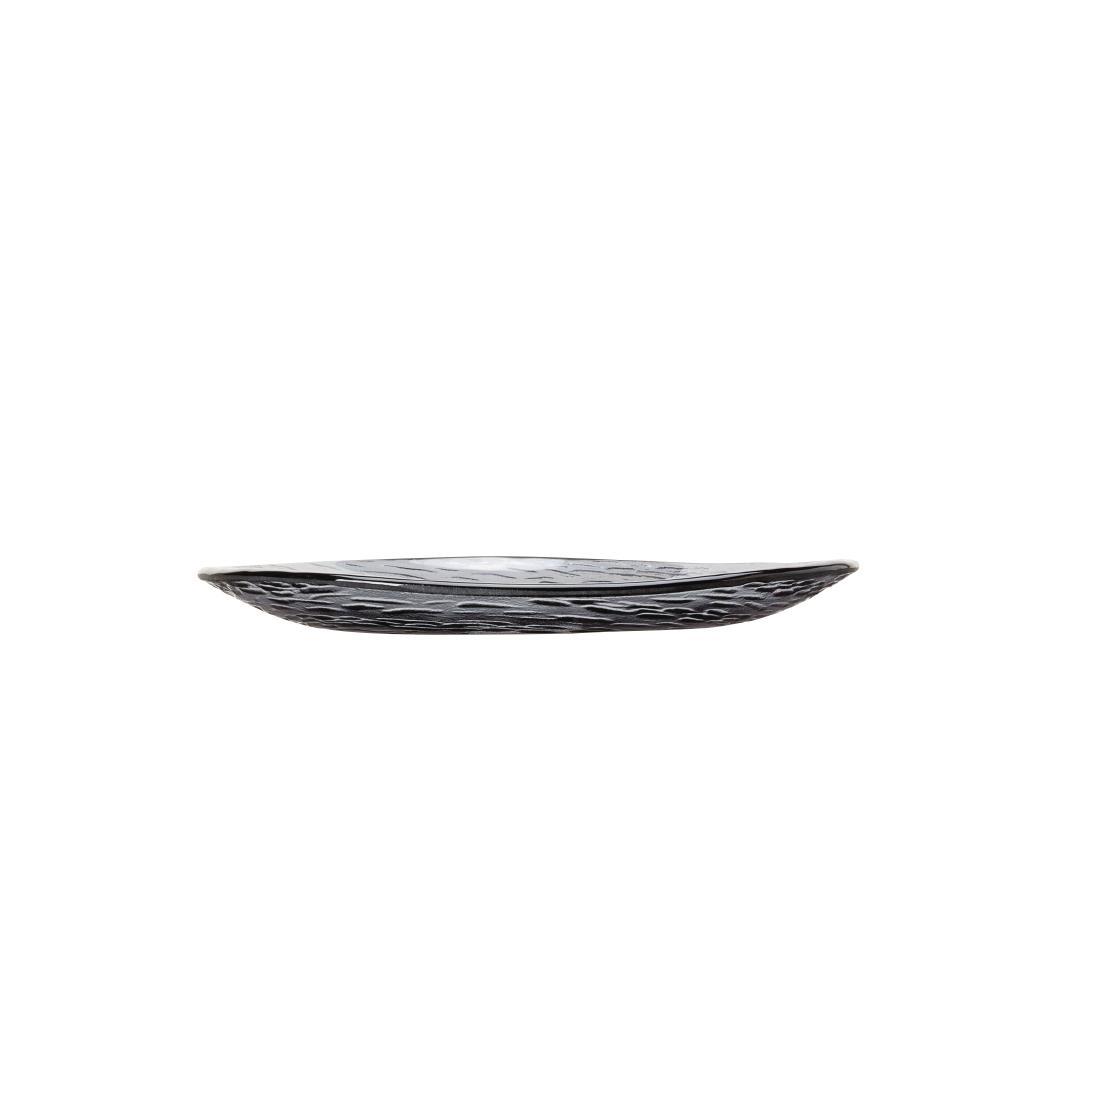 Steelite Scape Glass Platters 250mm Smoked (Pack of 12) - VV720  - 2